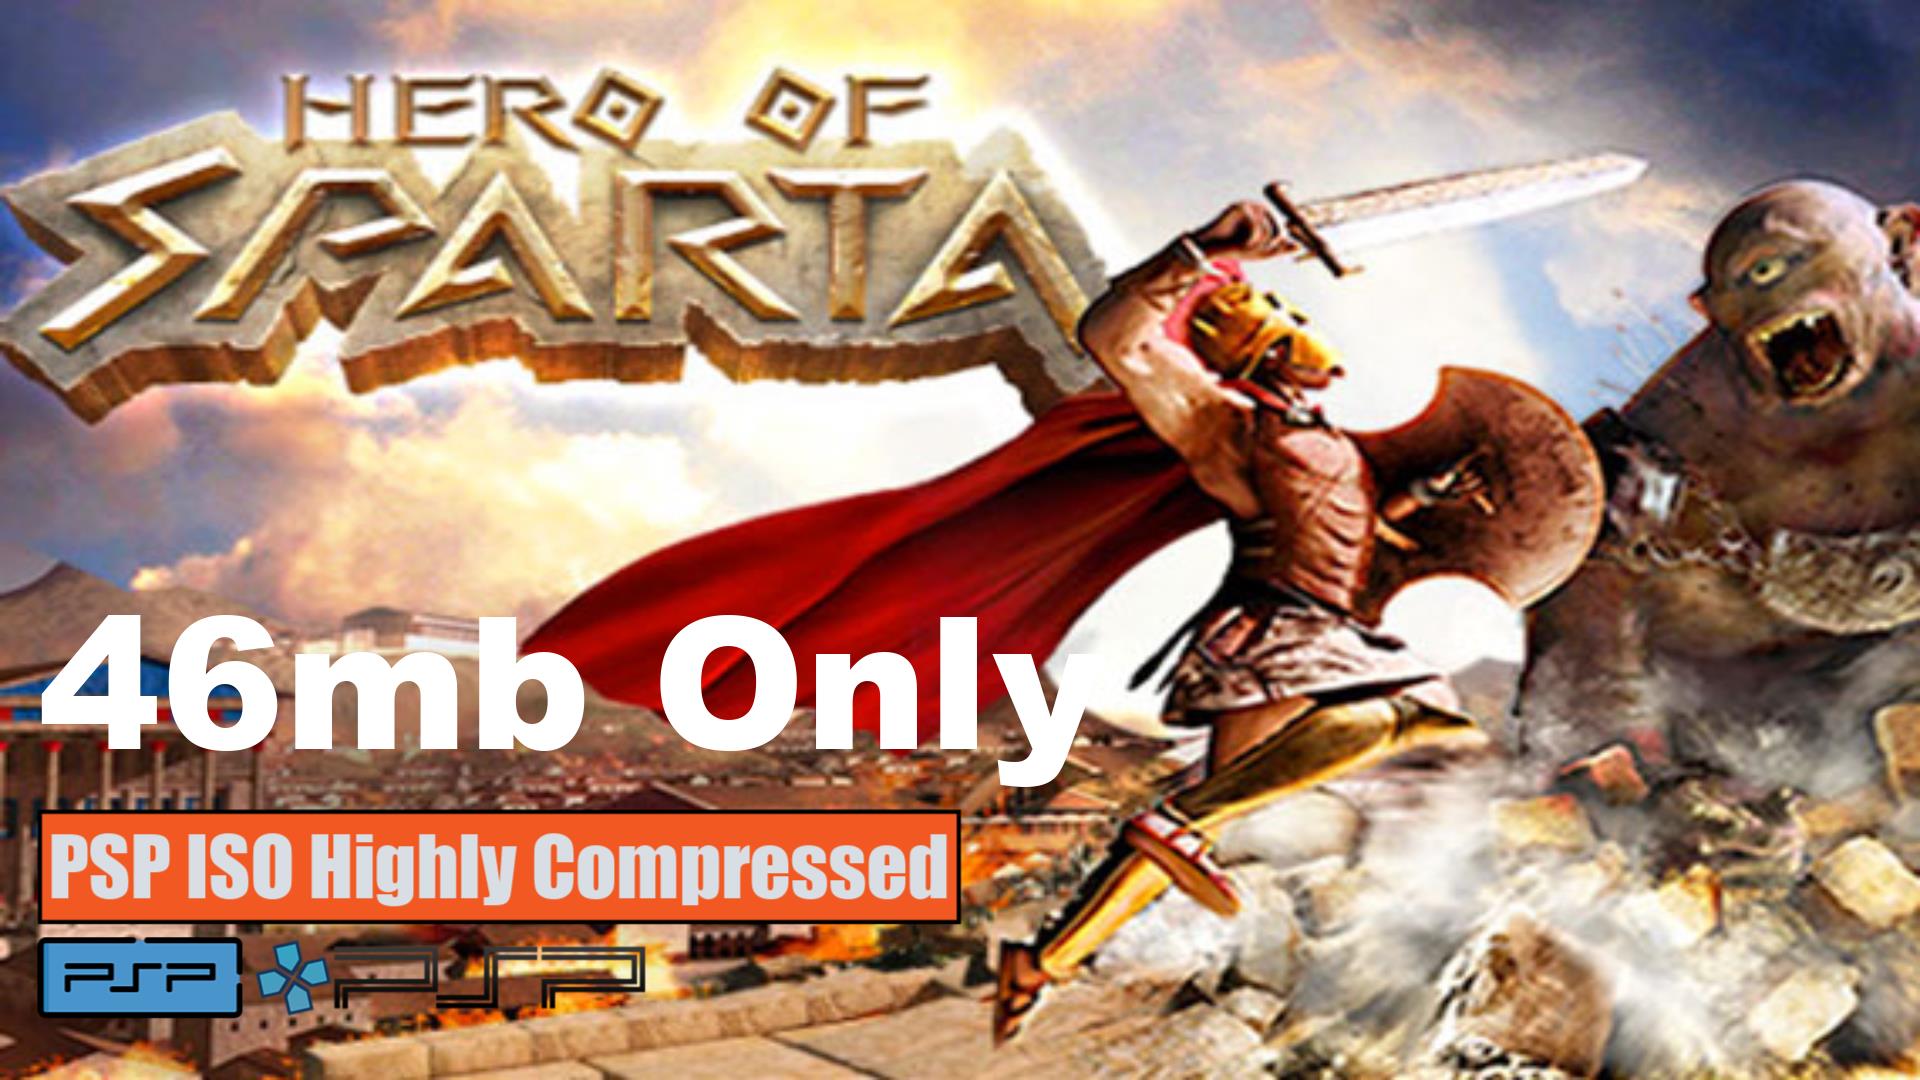 Hero of Sparta PSP ISO Highly Compressed